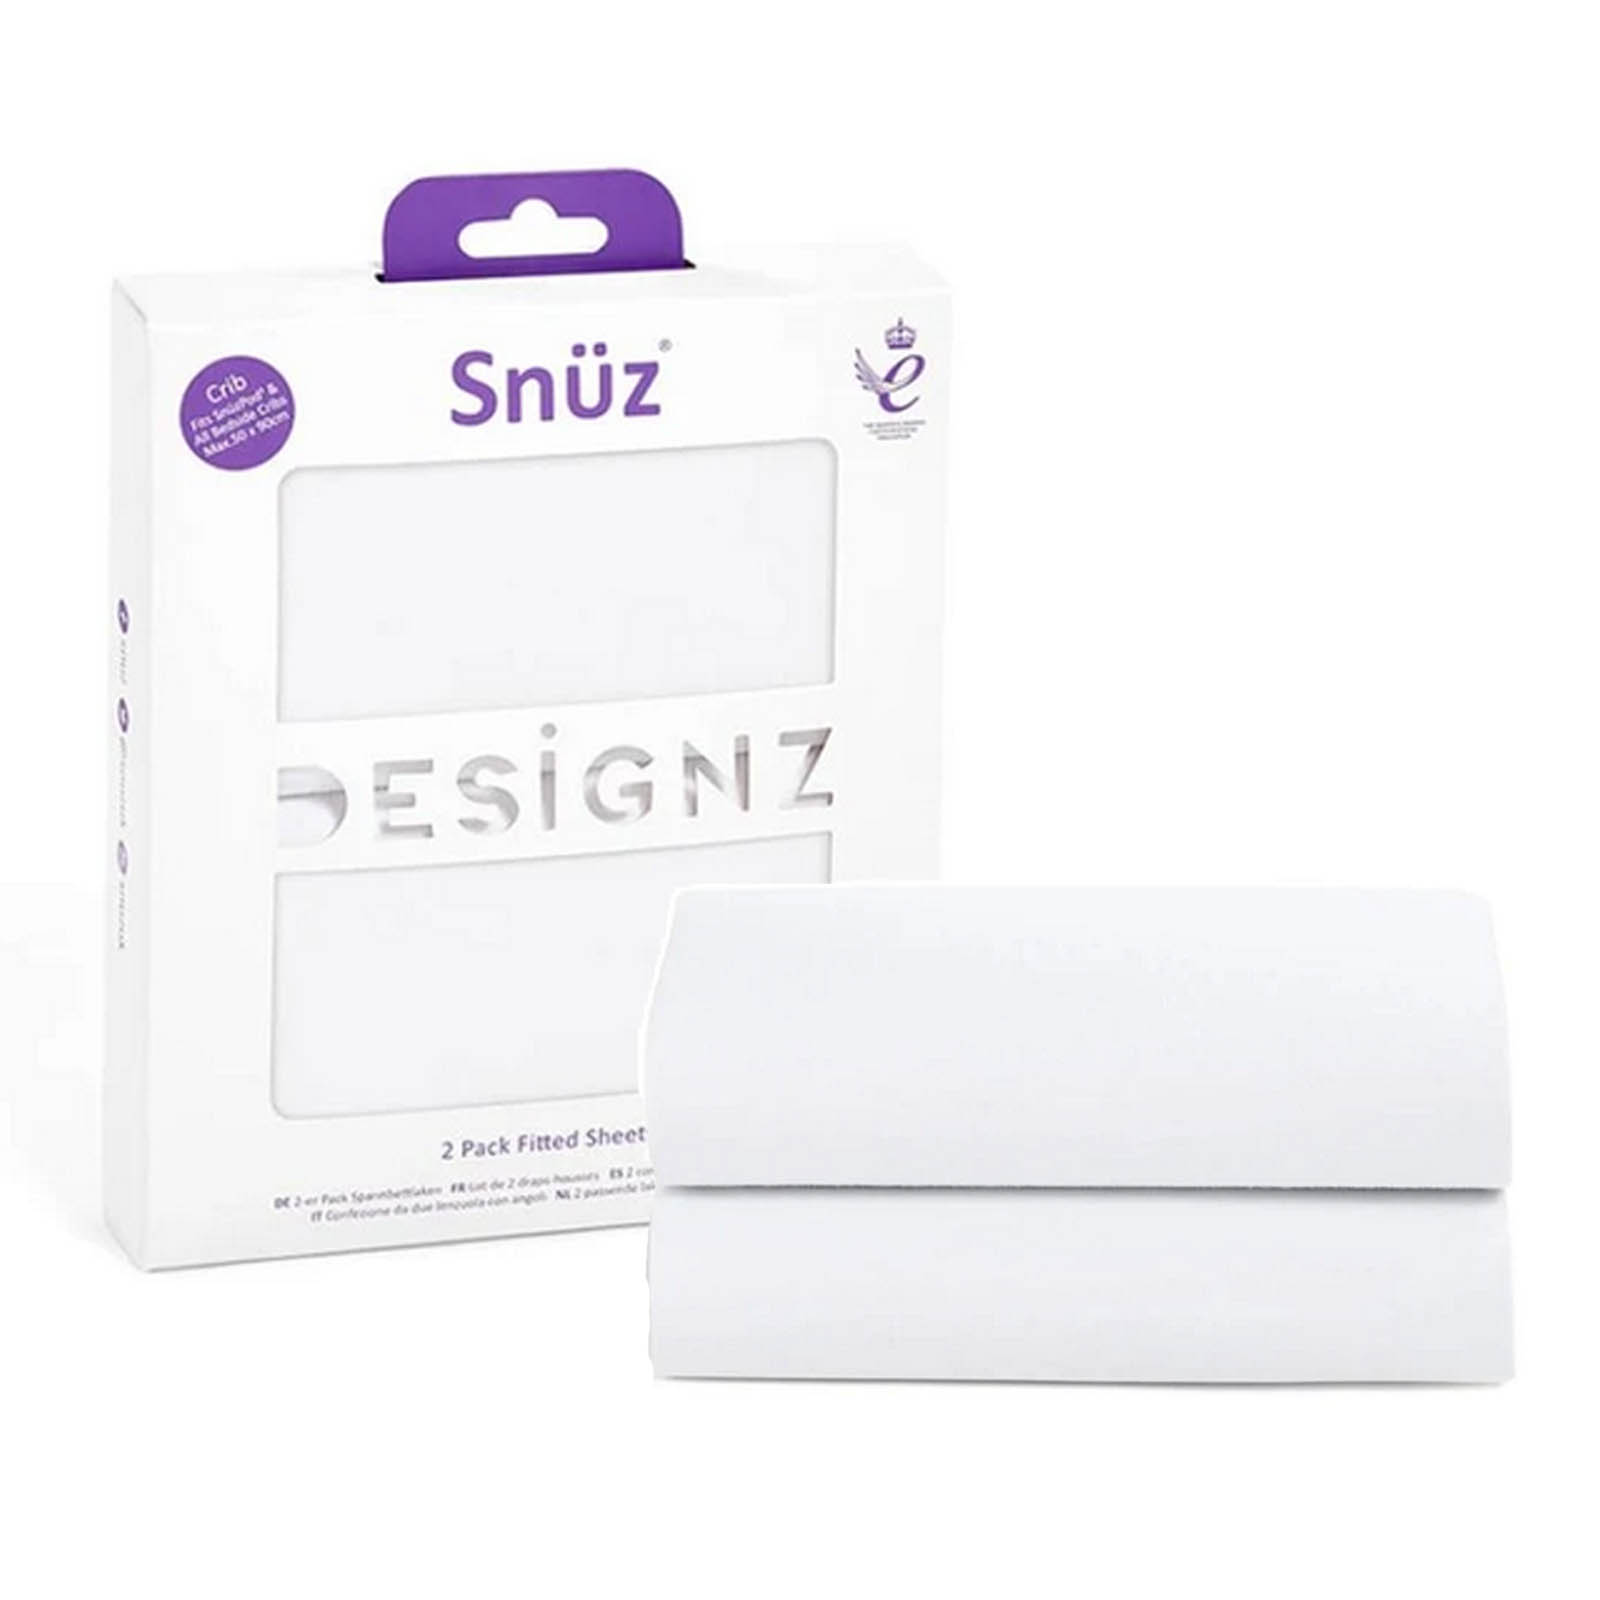 Snuz Crib Fitted Sheets (2 Pack) - White